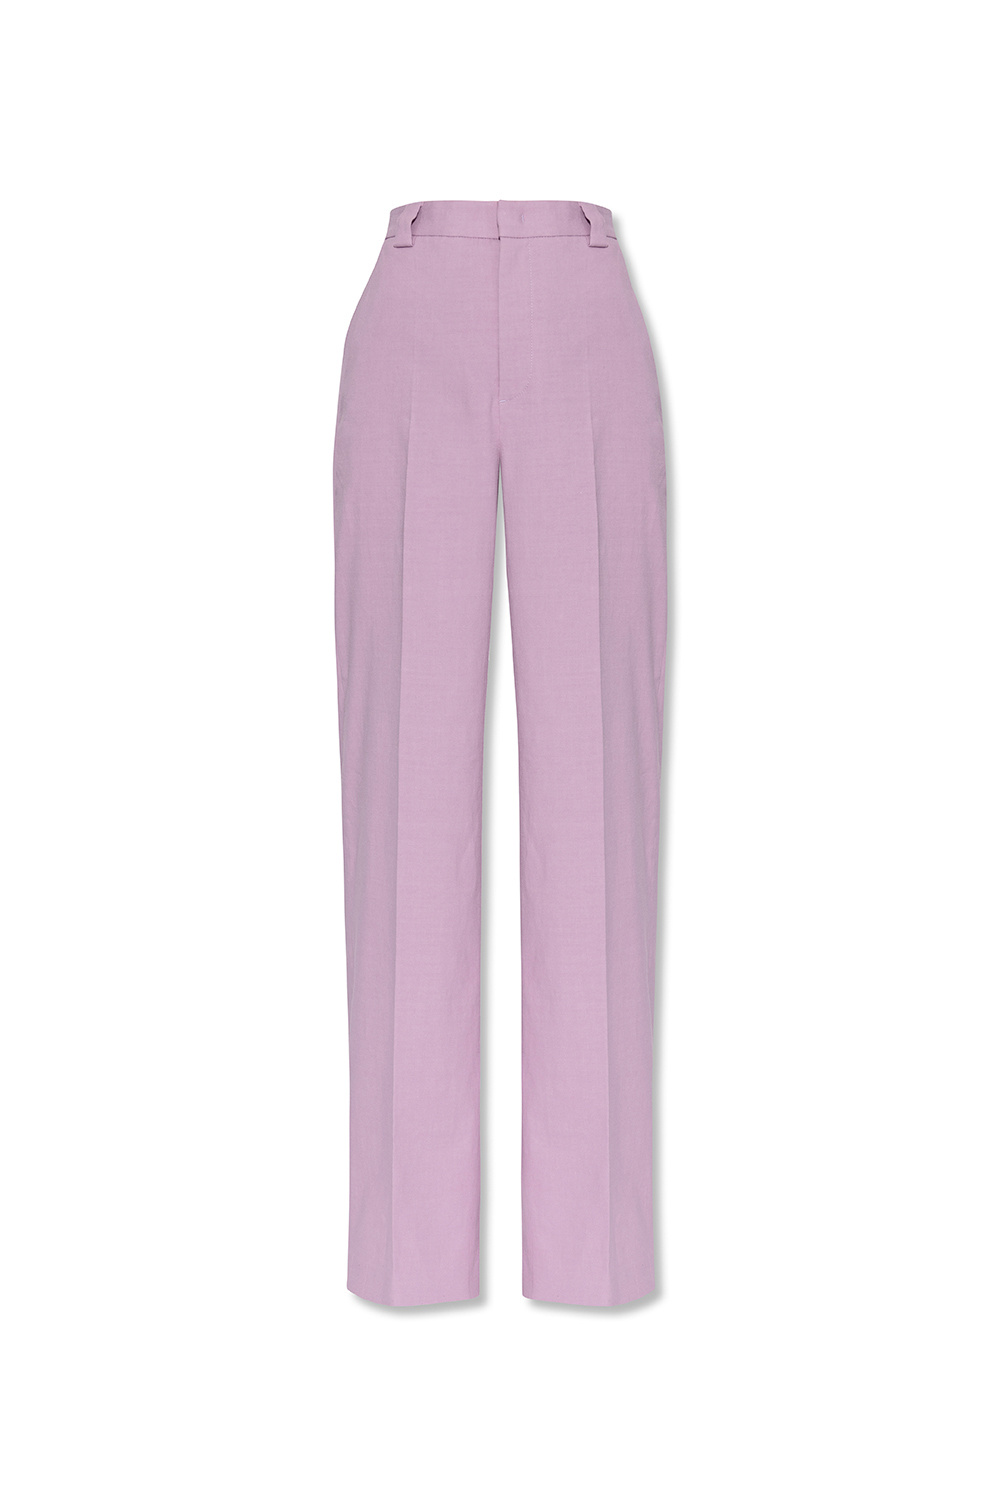 Red Valentino Pleat-front Noisy trousers